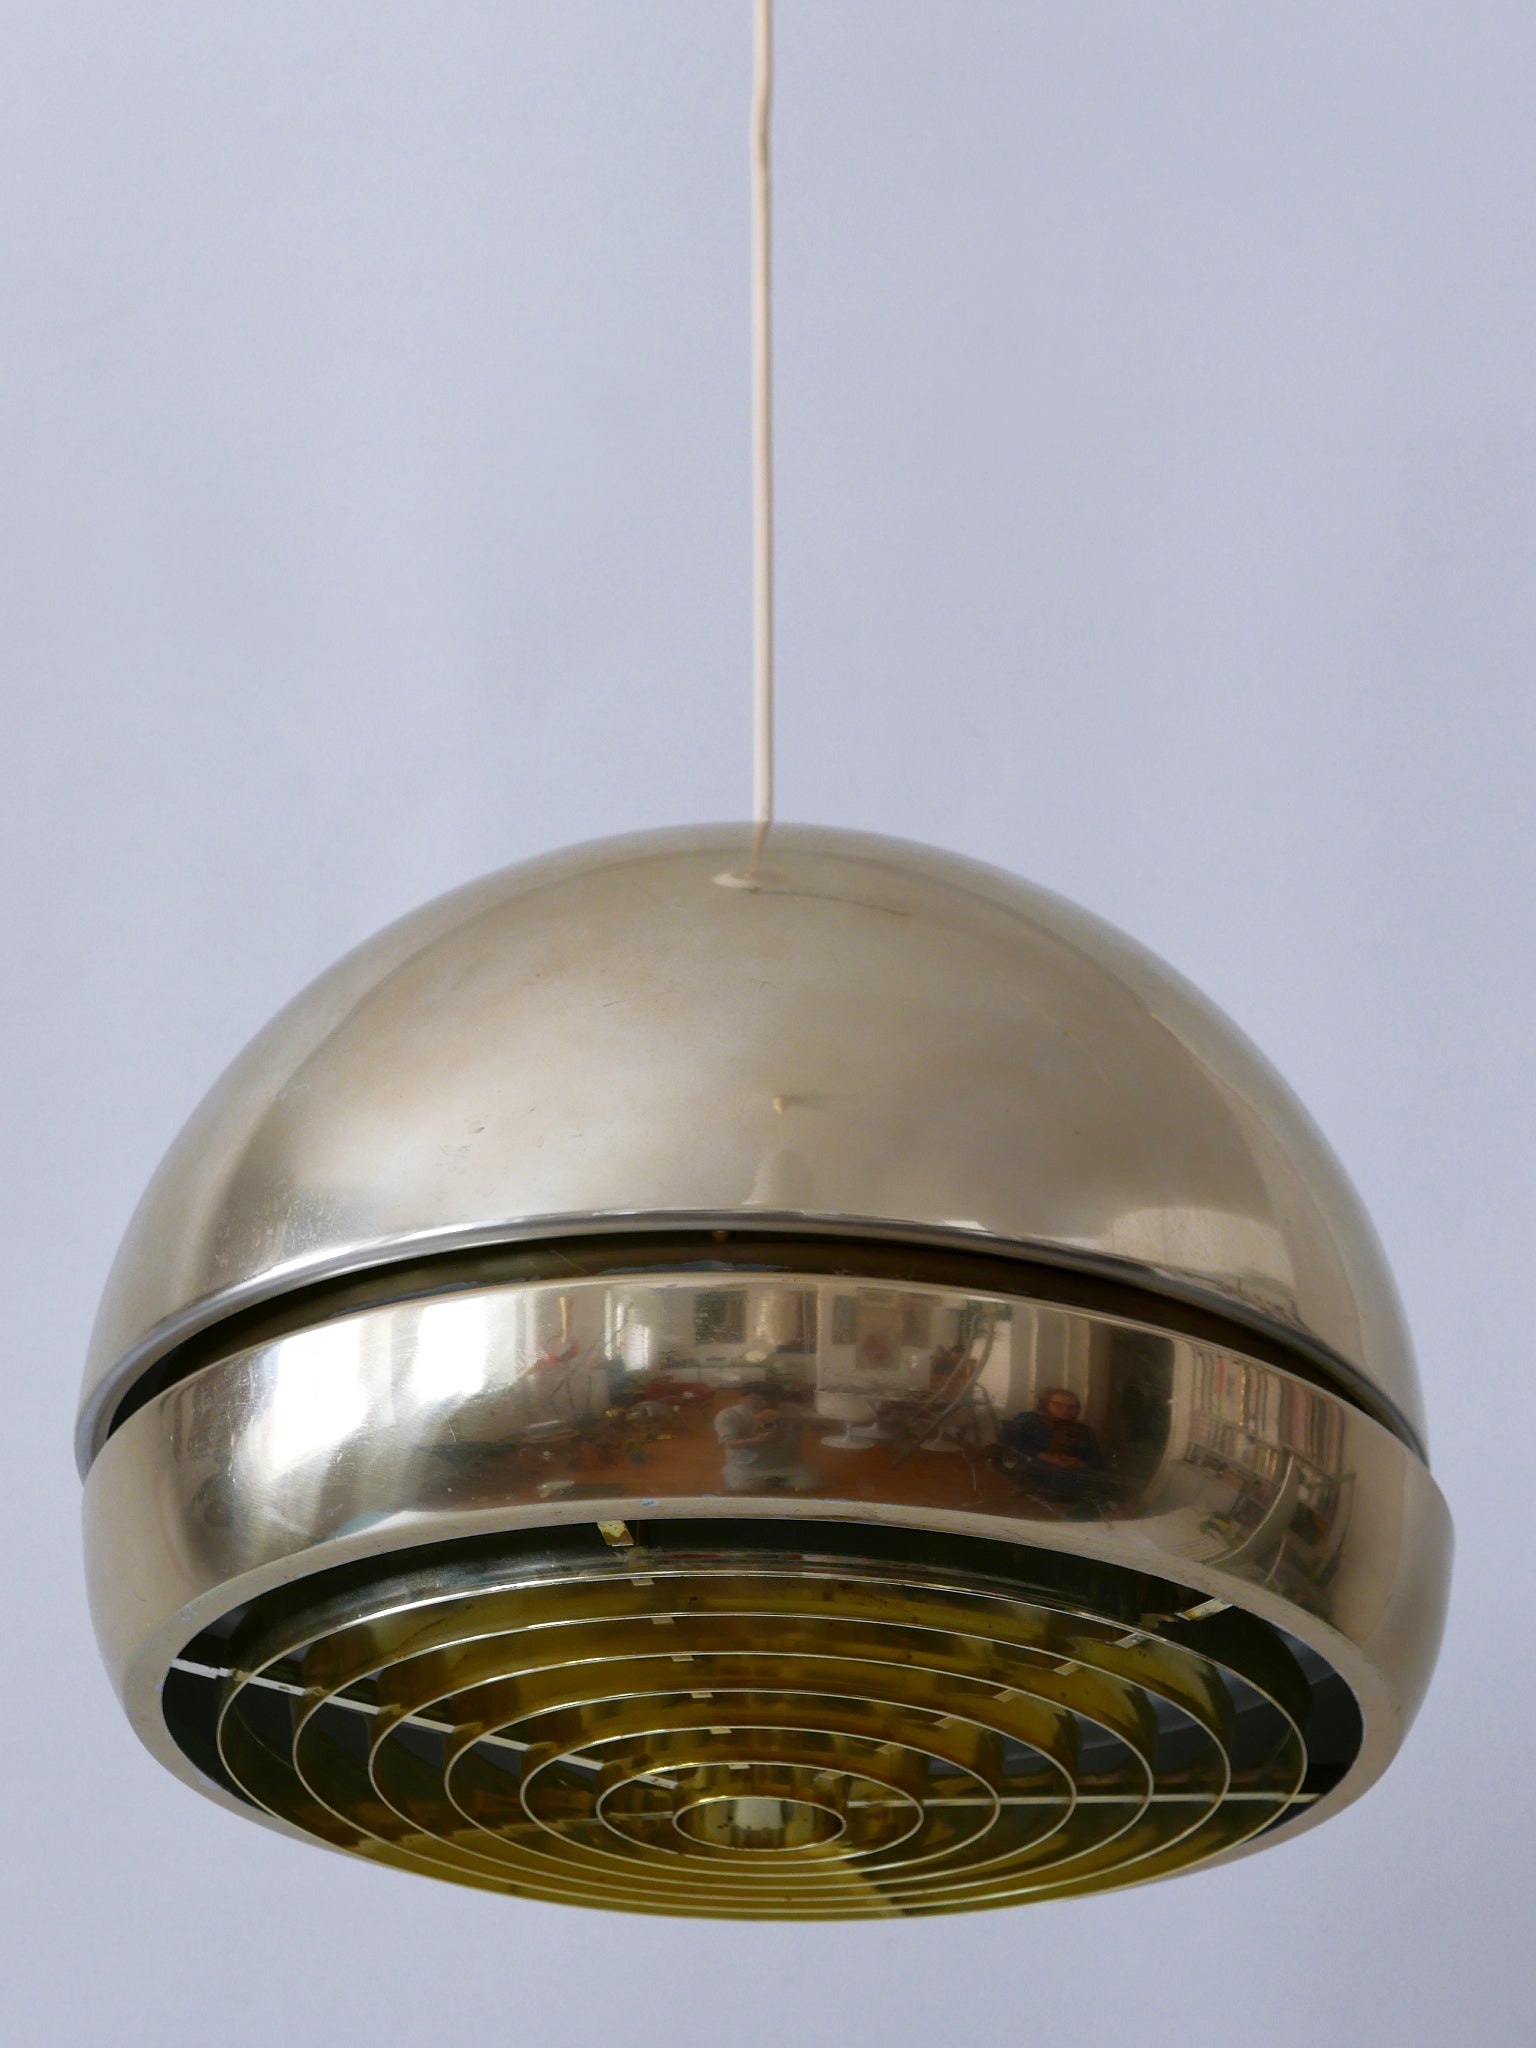 Rare, elegant and highly decorative Mid-Century Modern aluminum pendant lamp or hanging light. Designed and manufactured probably in Sweden, 1960s.

Executed in anodized aluminum and plastic reflector, the pendant lamp needs 1 x E27 / E26 Edison